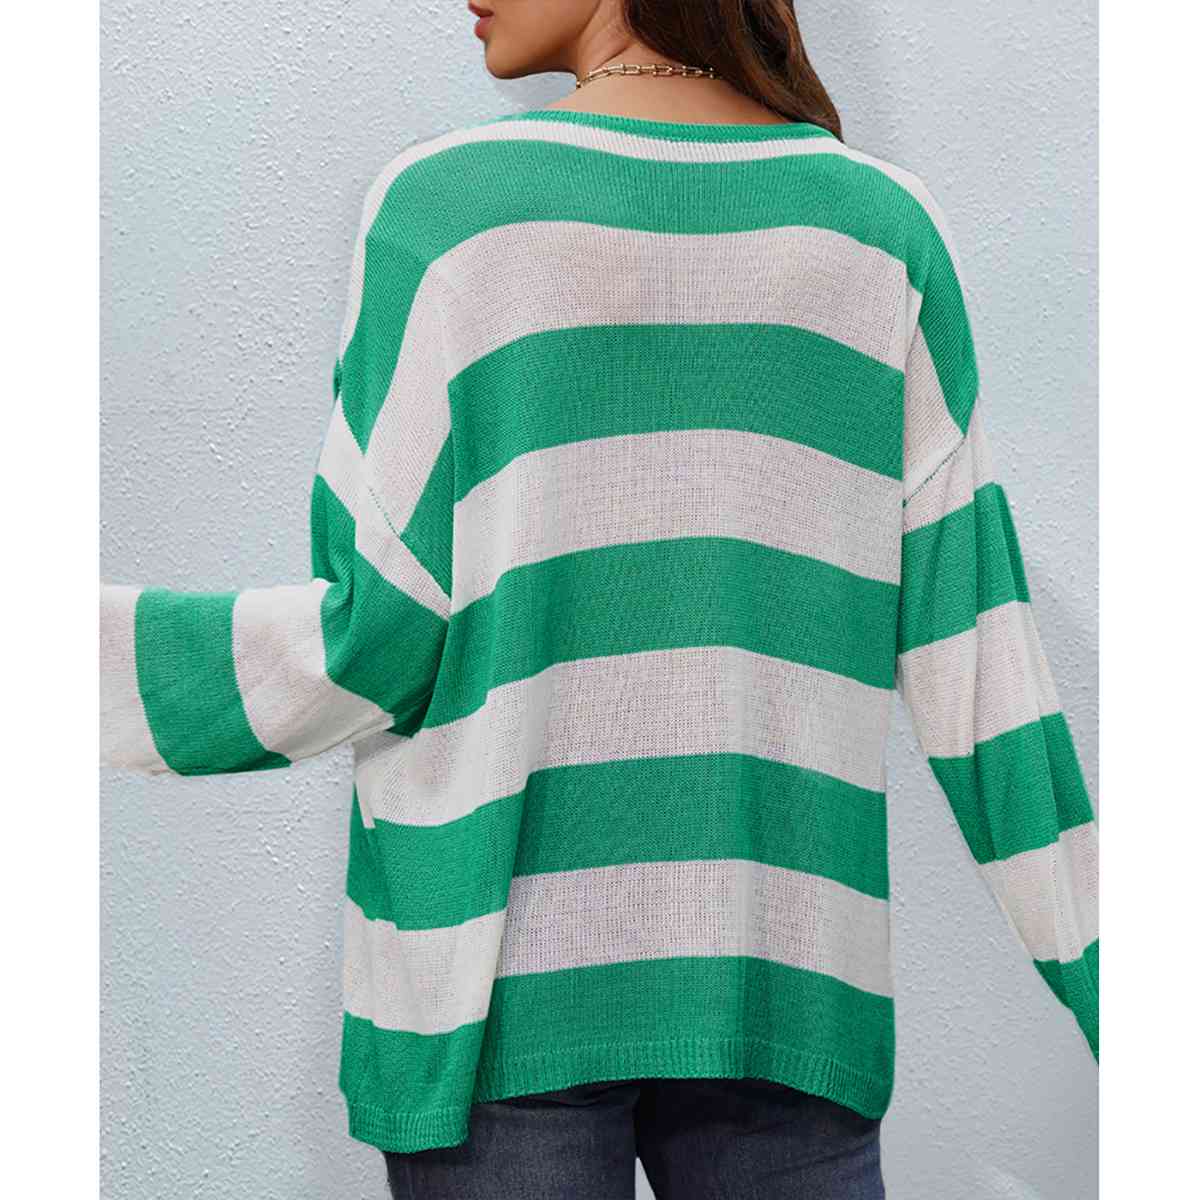 Striped Boat Neck Round Neck Sweater Print on any thing USA/STOD clothes